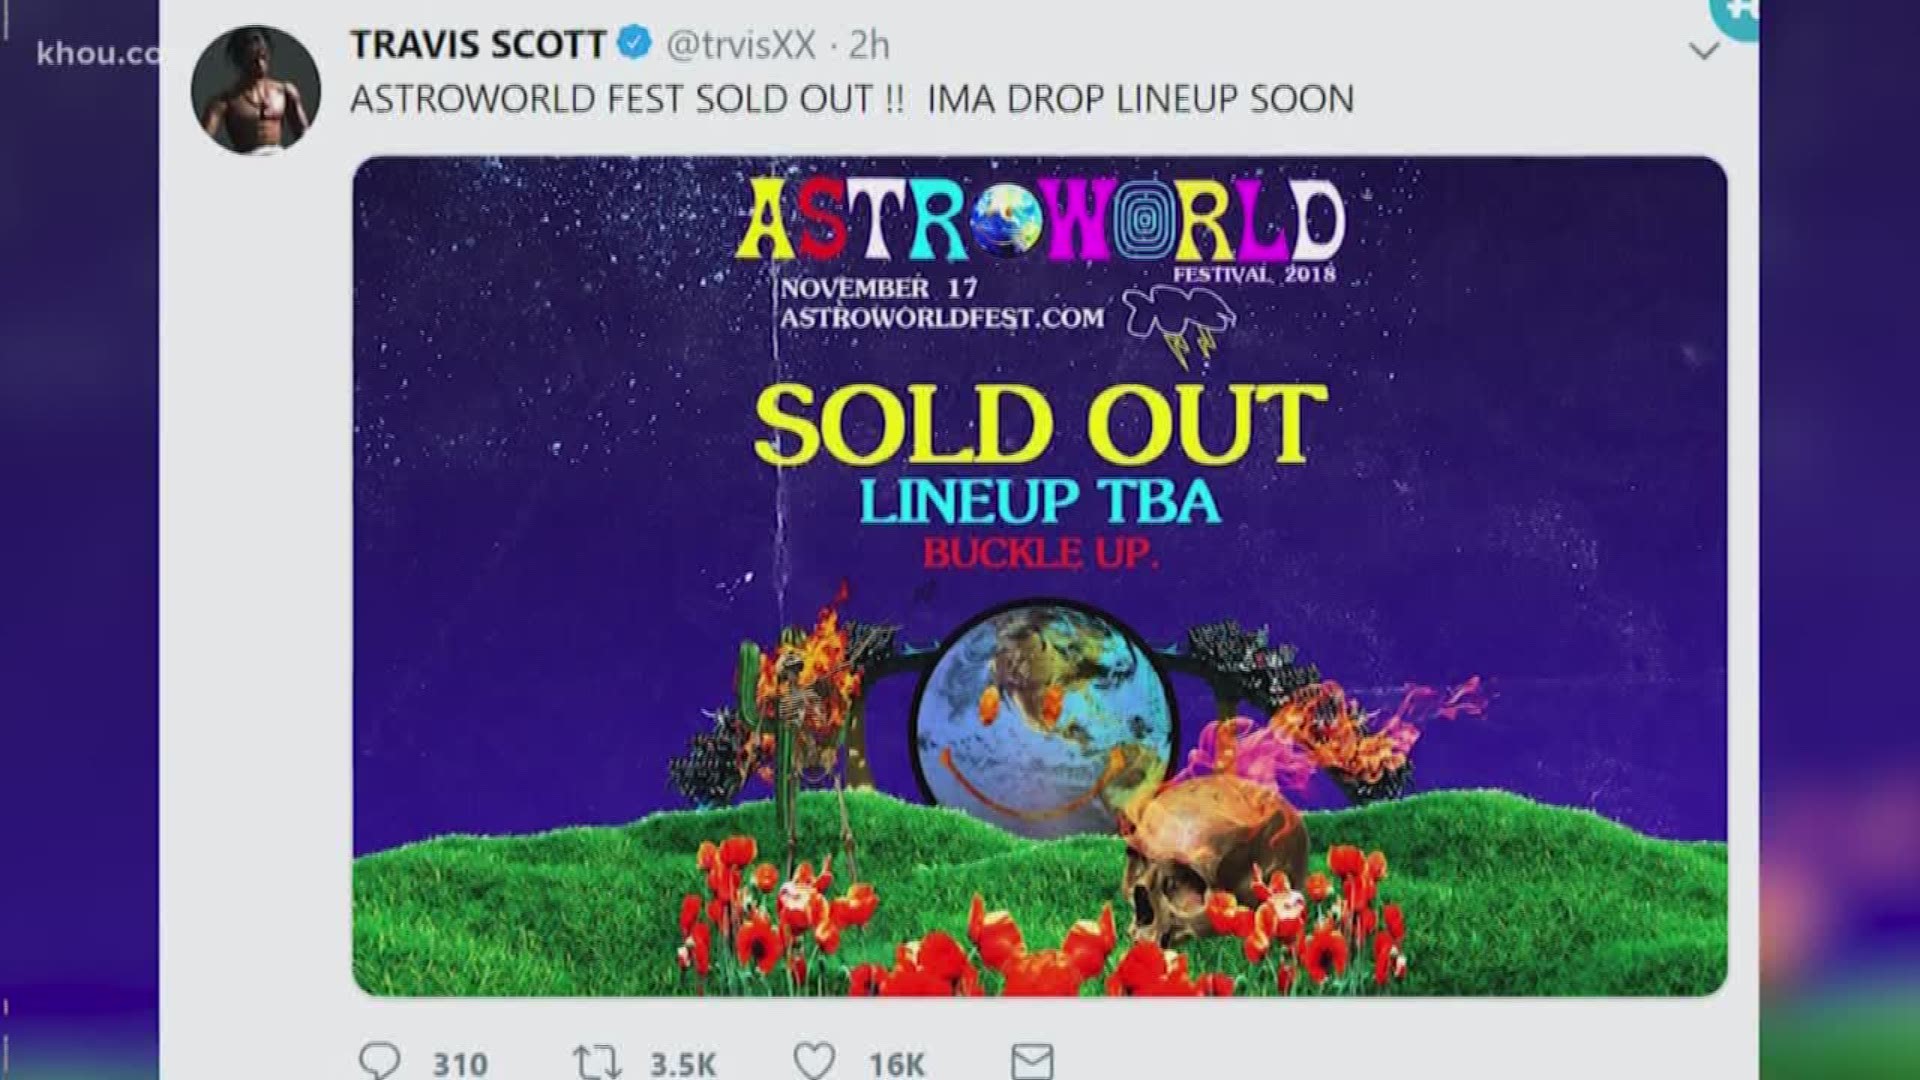 Missouri City native and rapper Travis Scott is left tickets to his sold-out Astroworld Festival at two voting locations in Houston and Missouri City.